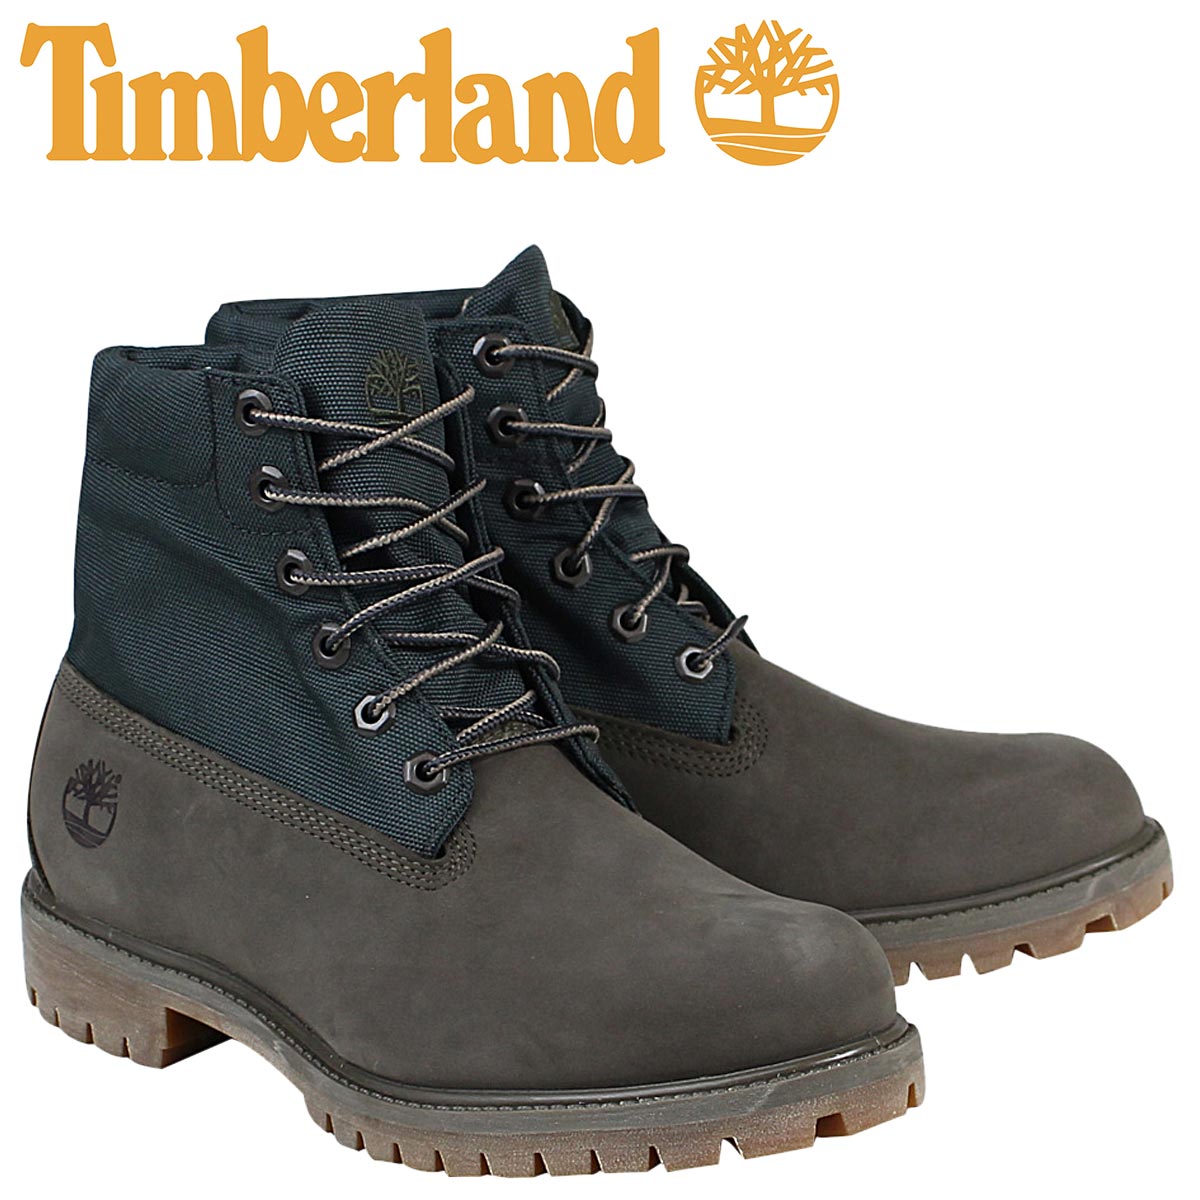 timberland cordura buy clothes shoes online